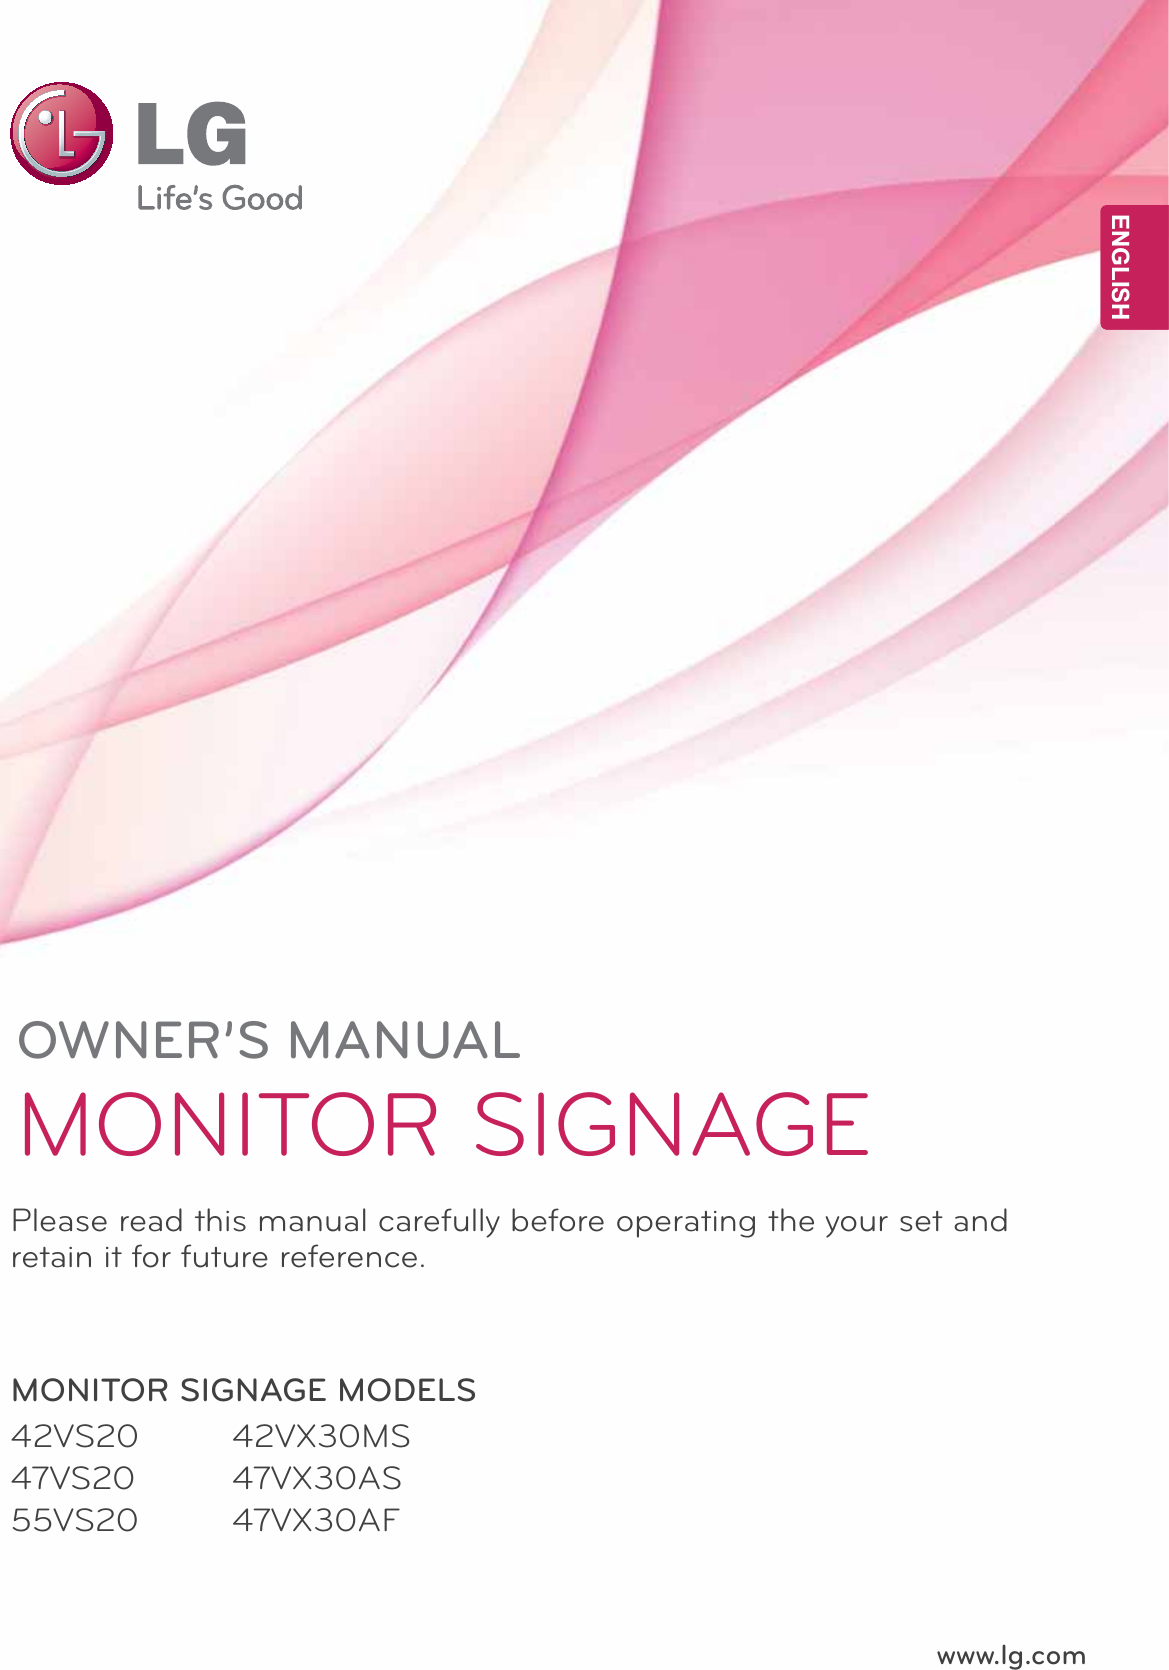 www.lg.comOWNER’S MANUALMONITOR SIGNAGE 42VS2047VS2055VS20Please read this manual carefully before operating the your set and retain it for future reference.MONITOR SIGNAGE MODELS42VX30MS47VX30AS47VX30AF